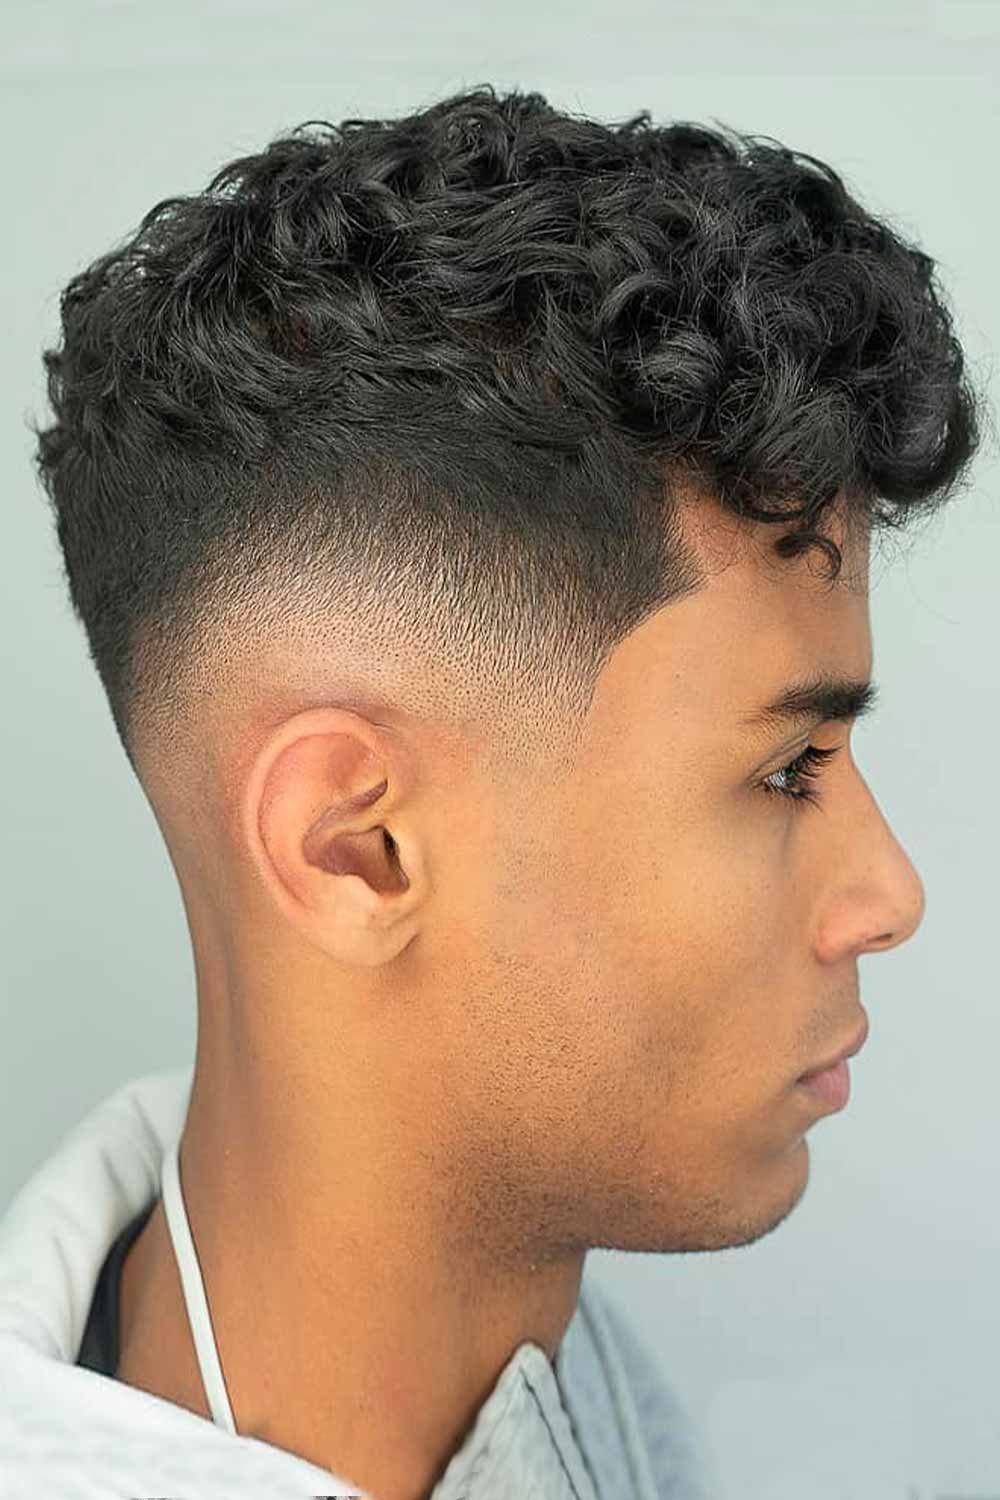 80 Men Hairstyles For Round Face-Dense Curled Top with Drop Fade